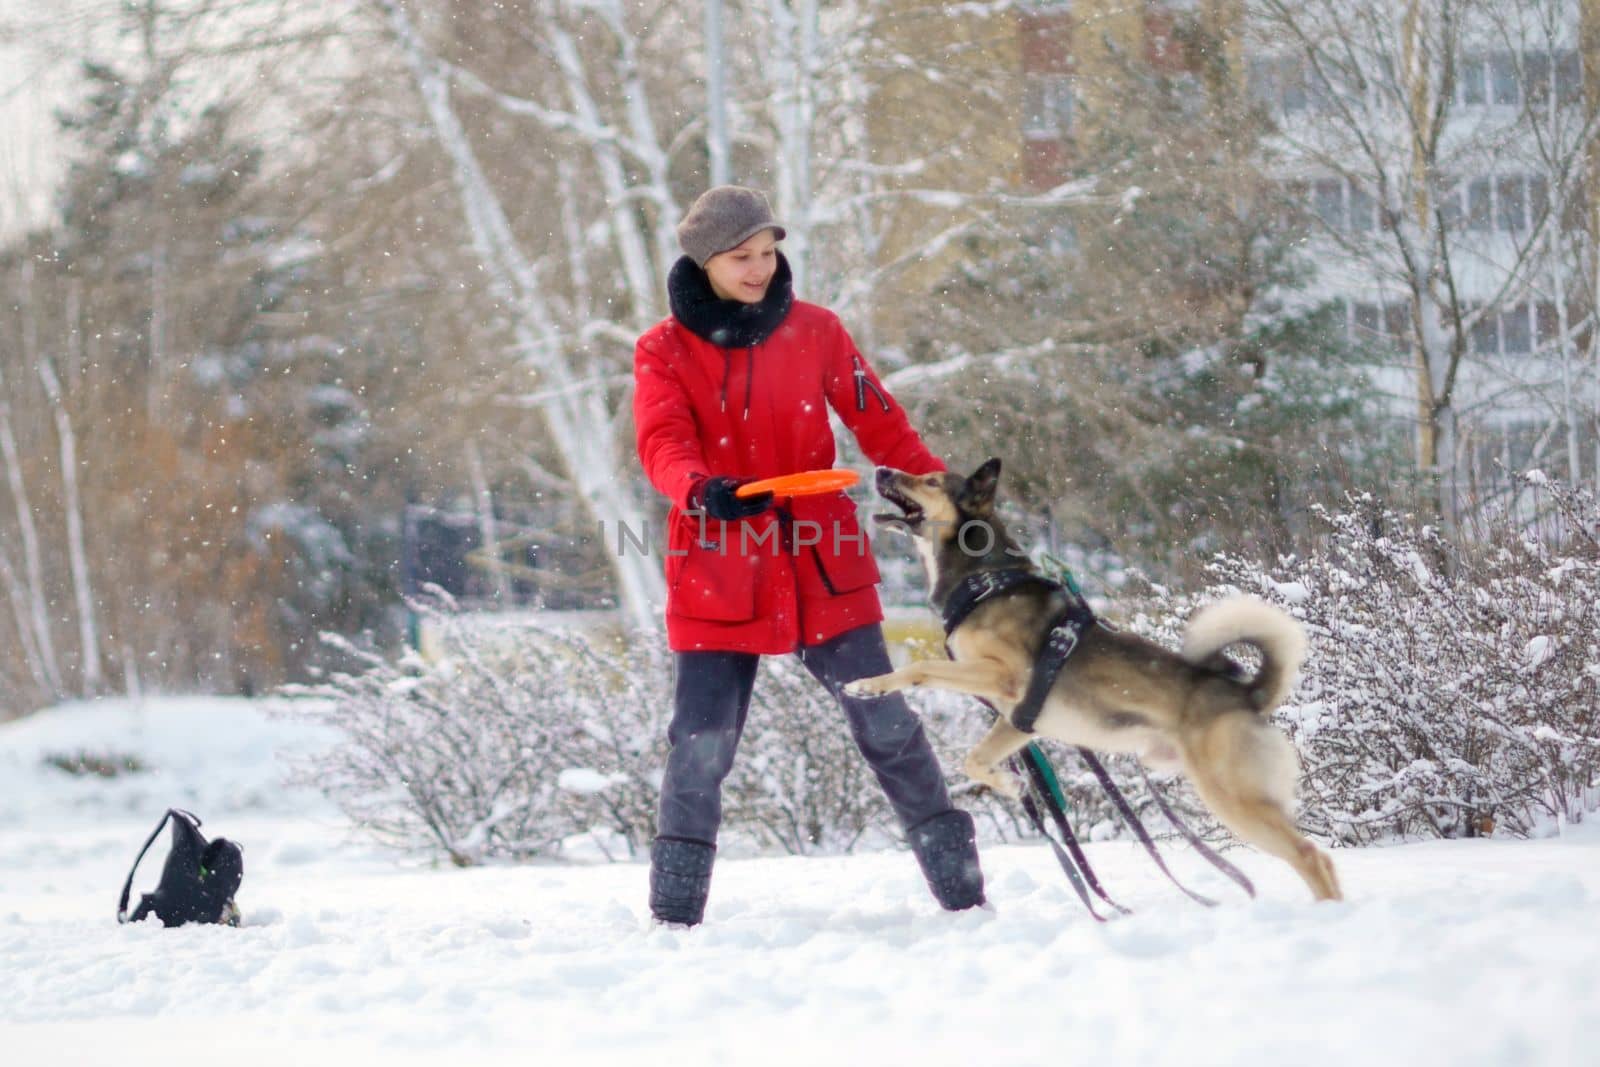 Girl playing with dog in snow in winter time with snowflakes in air. Selective focus by darksoul72